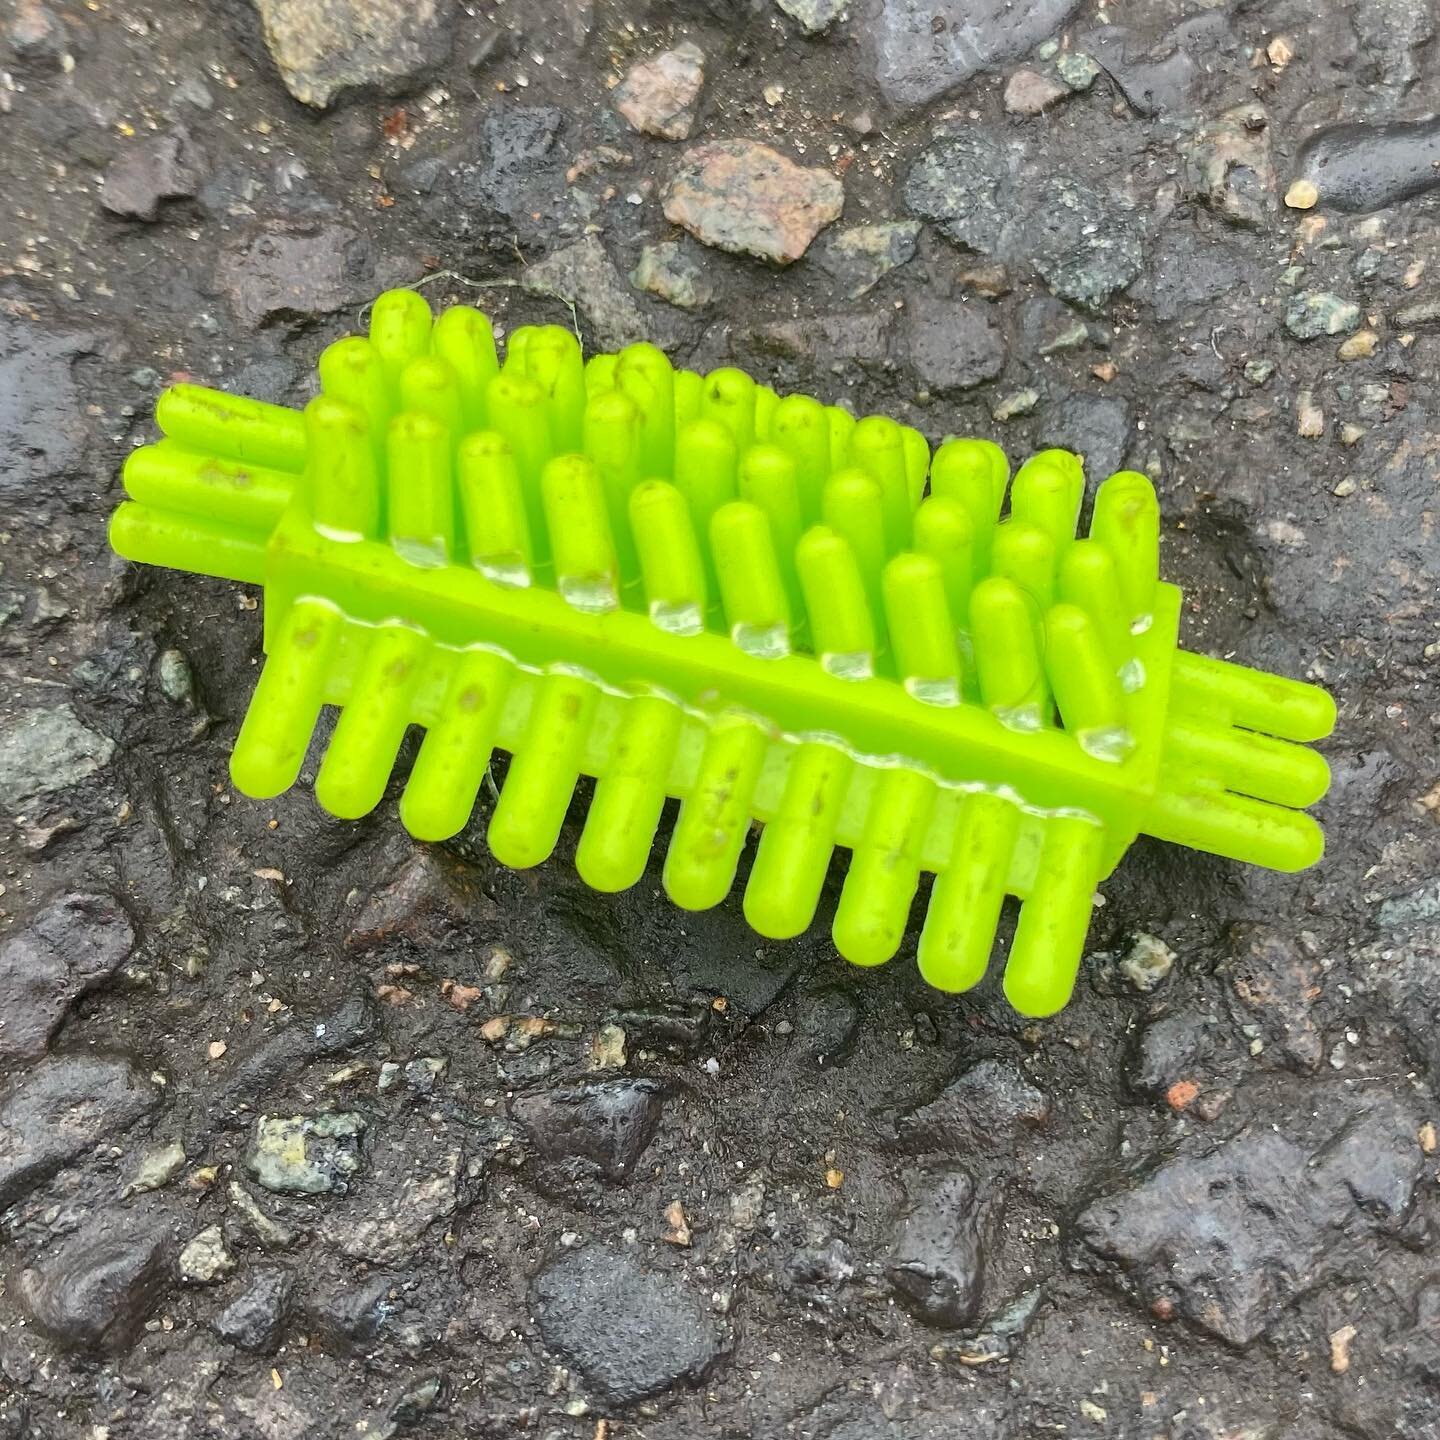 #plastic #foundobjects #found #archive #collection #street #pavement #plasticpollution #plasticpollutes #toy